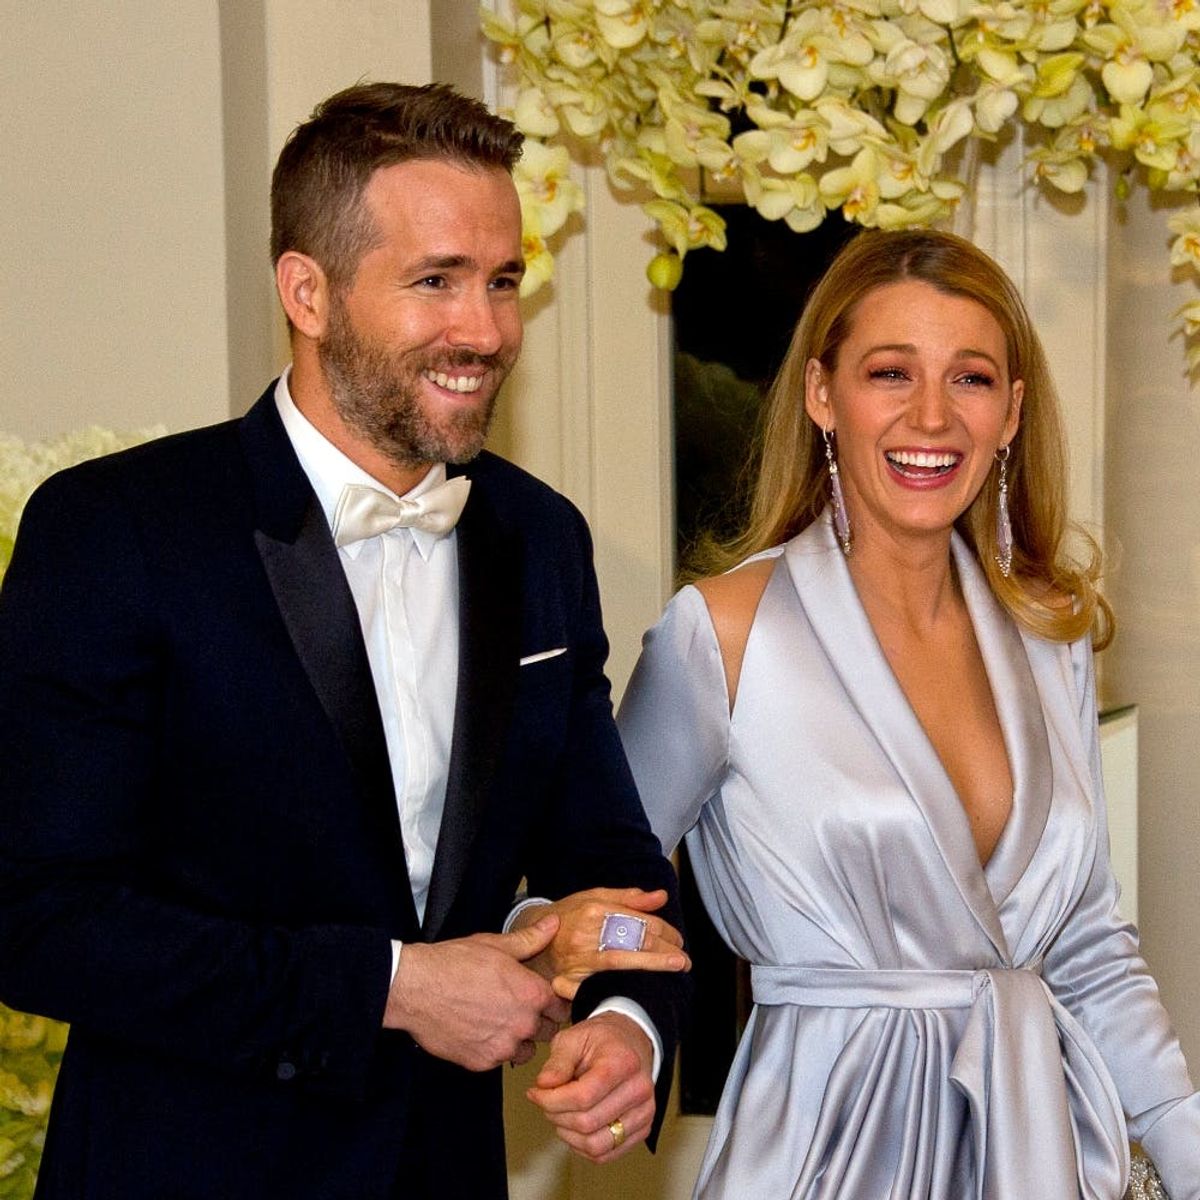 Blake Lively Sent an Adorable 40th Birthday Message to Ryan Reynolds Revealing Where They Fell in Love